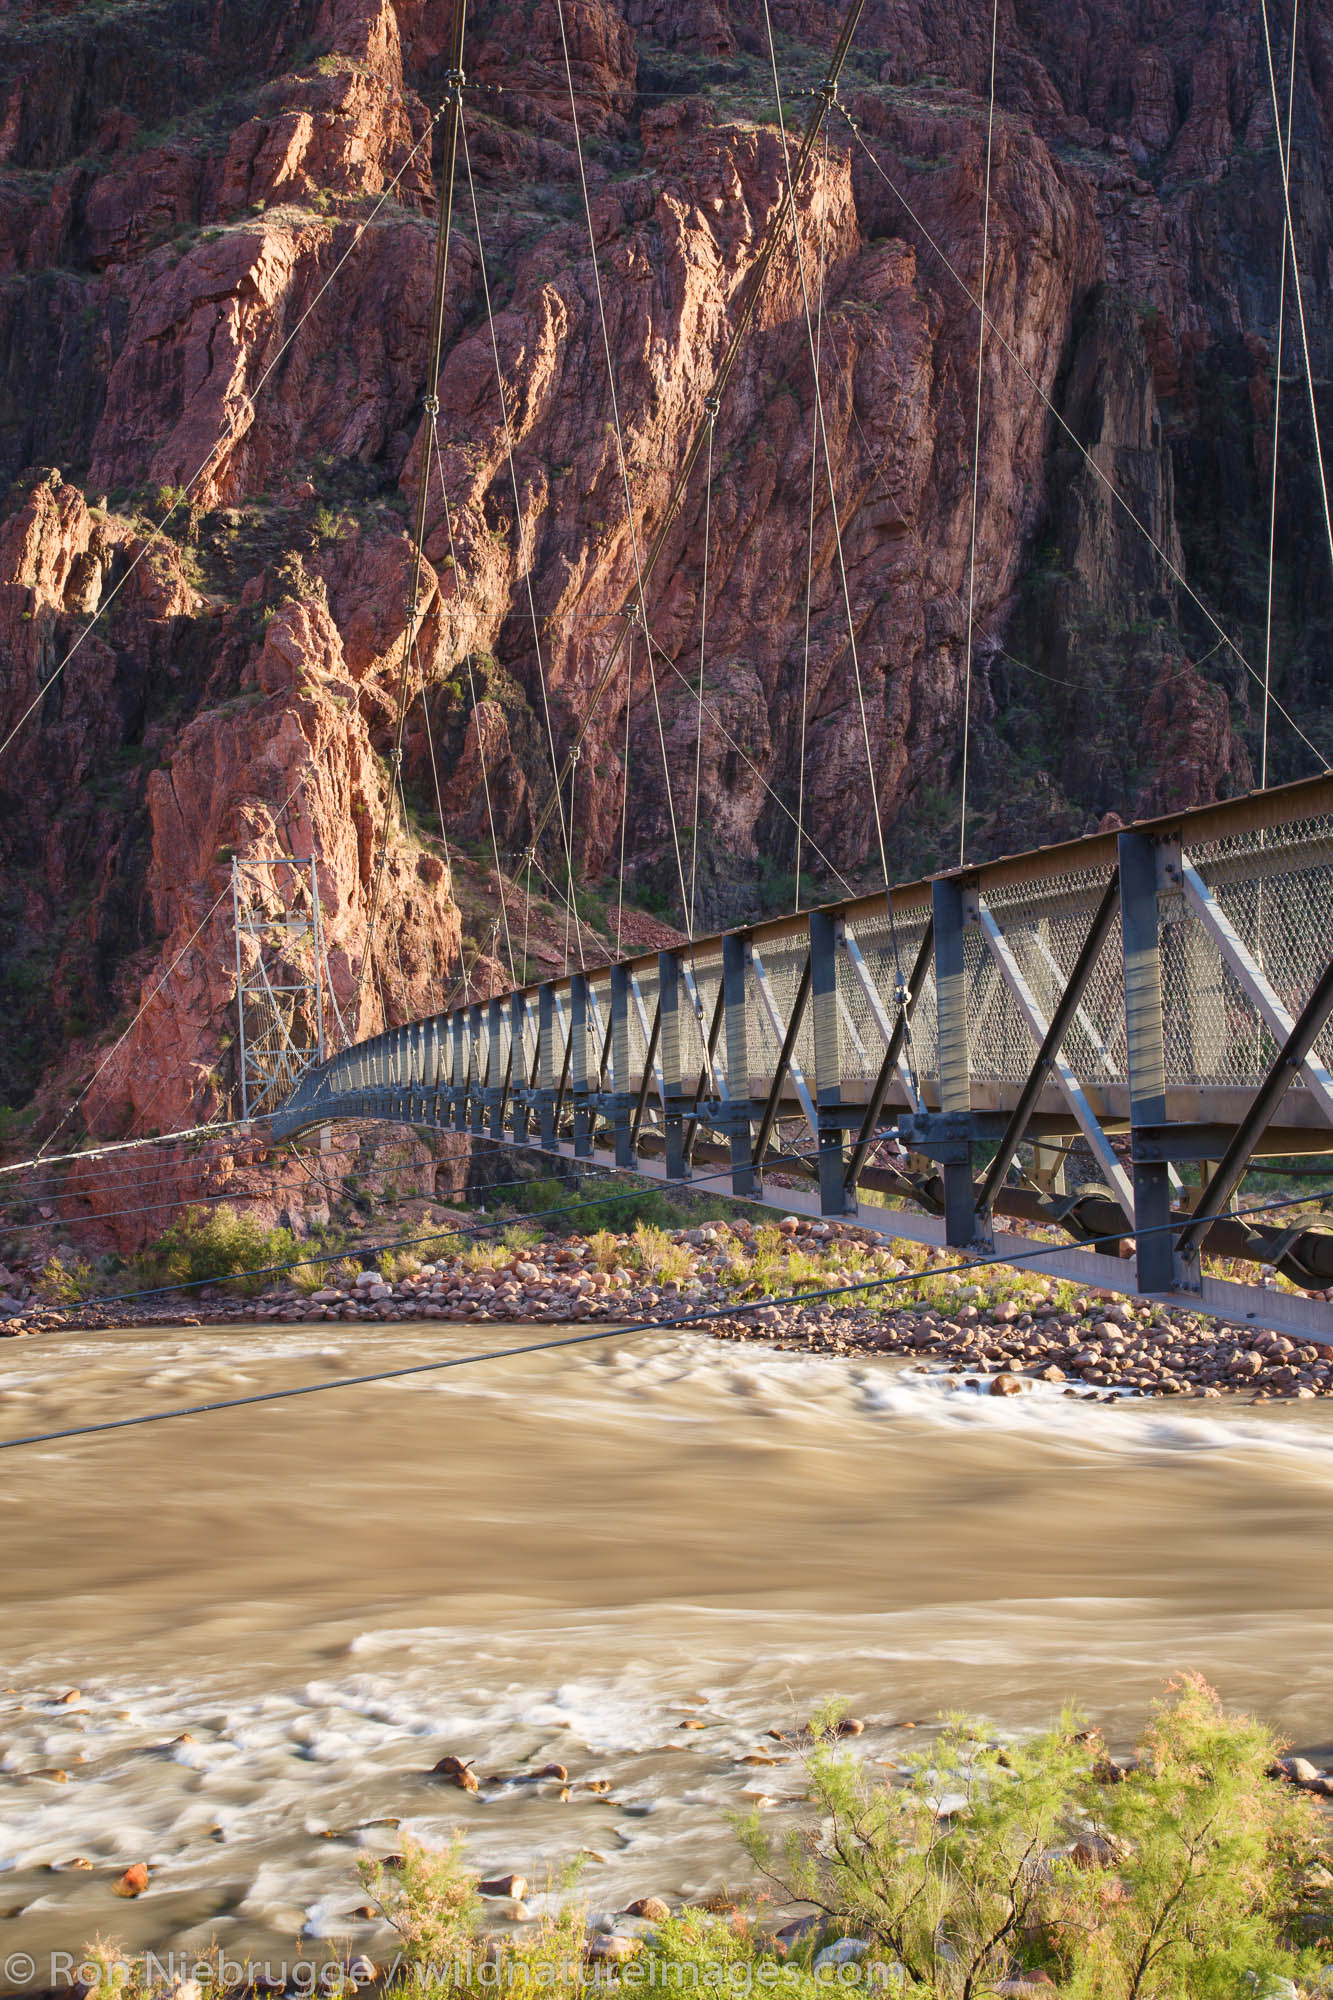 Silver Bridge over the Colorado River on the Bright Angel Trail at the bottom of Grand Canyon National Park, Arizona.